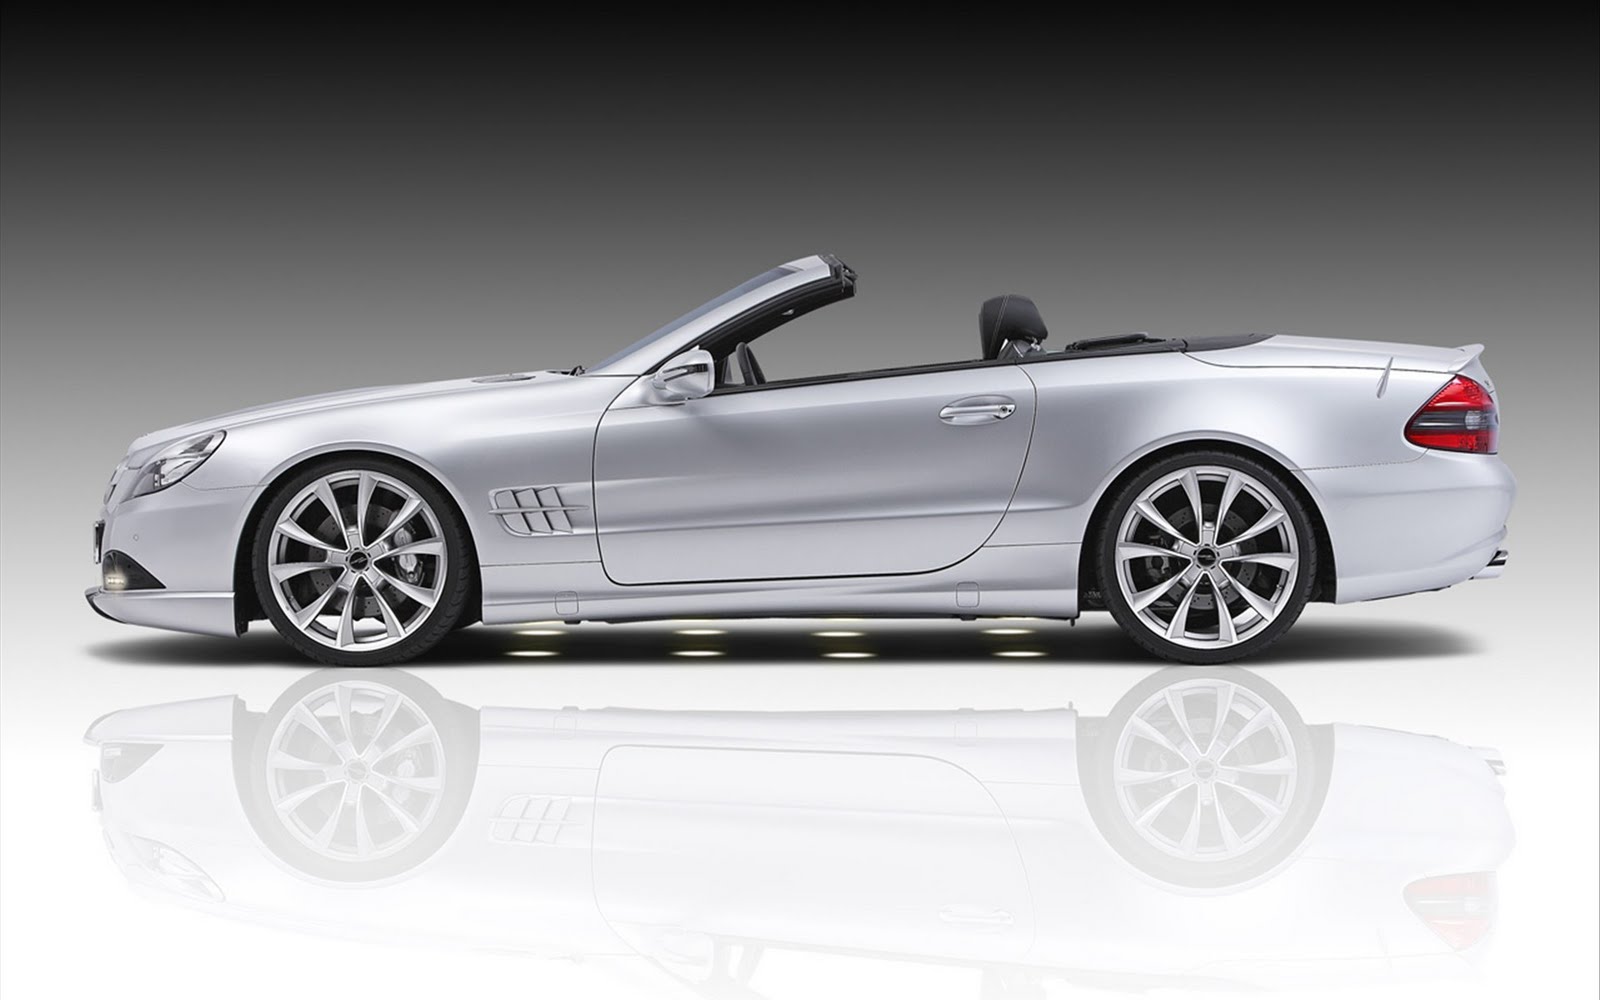 Mercedes Benz SL R230 Facelift Review and Spec ...